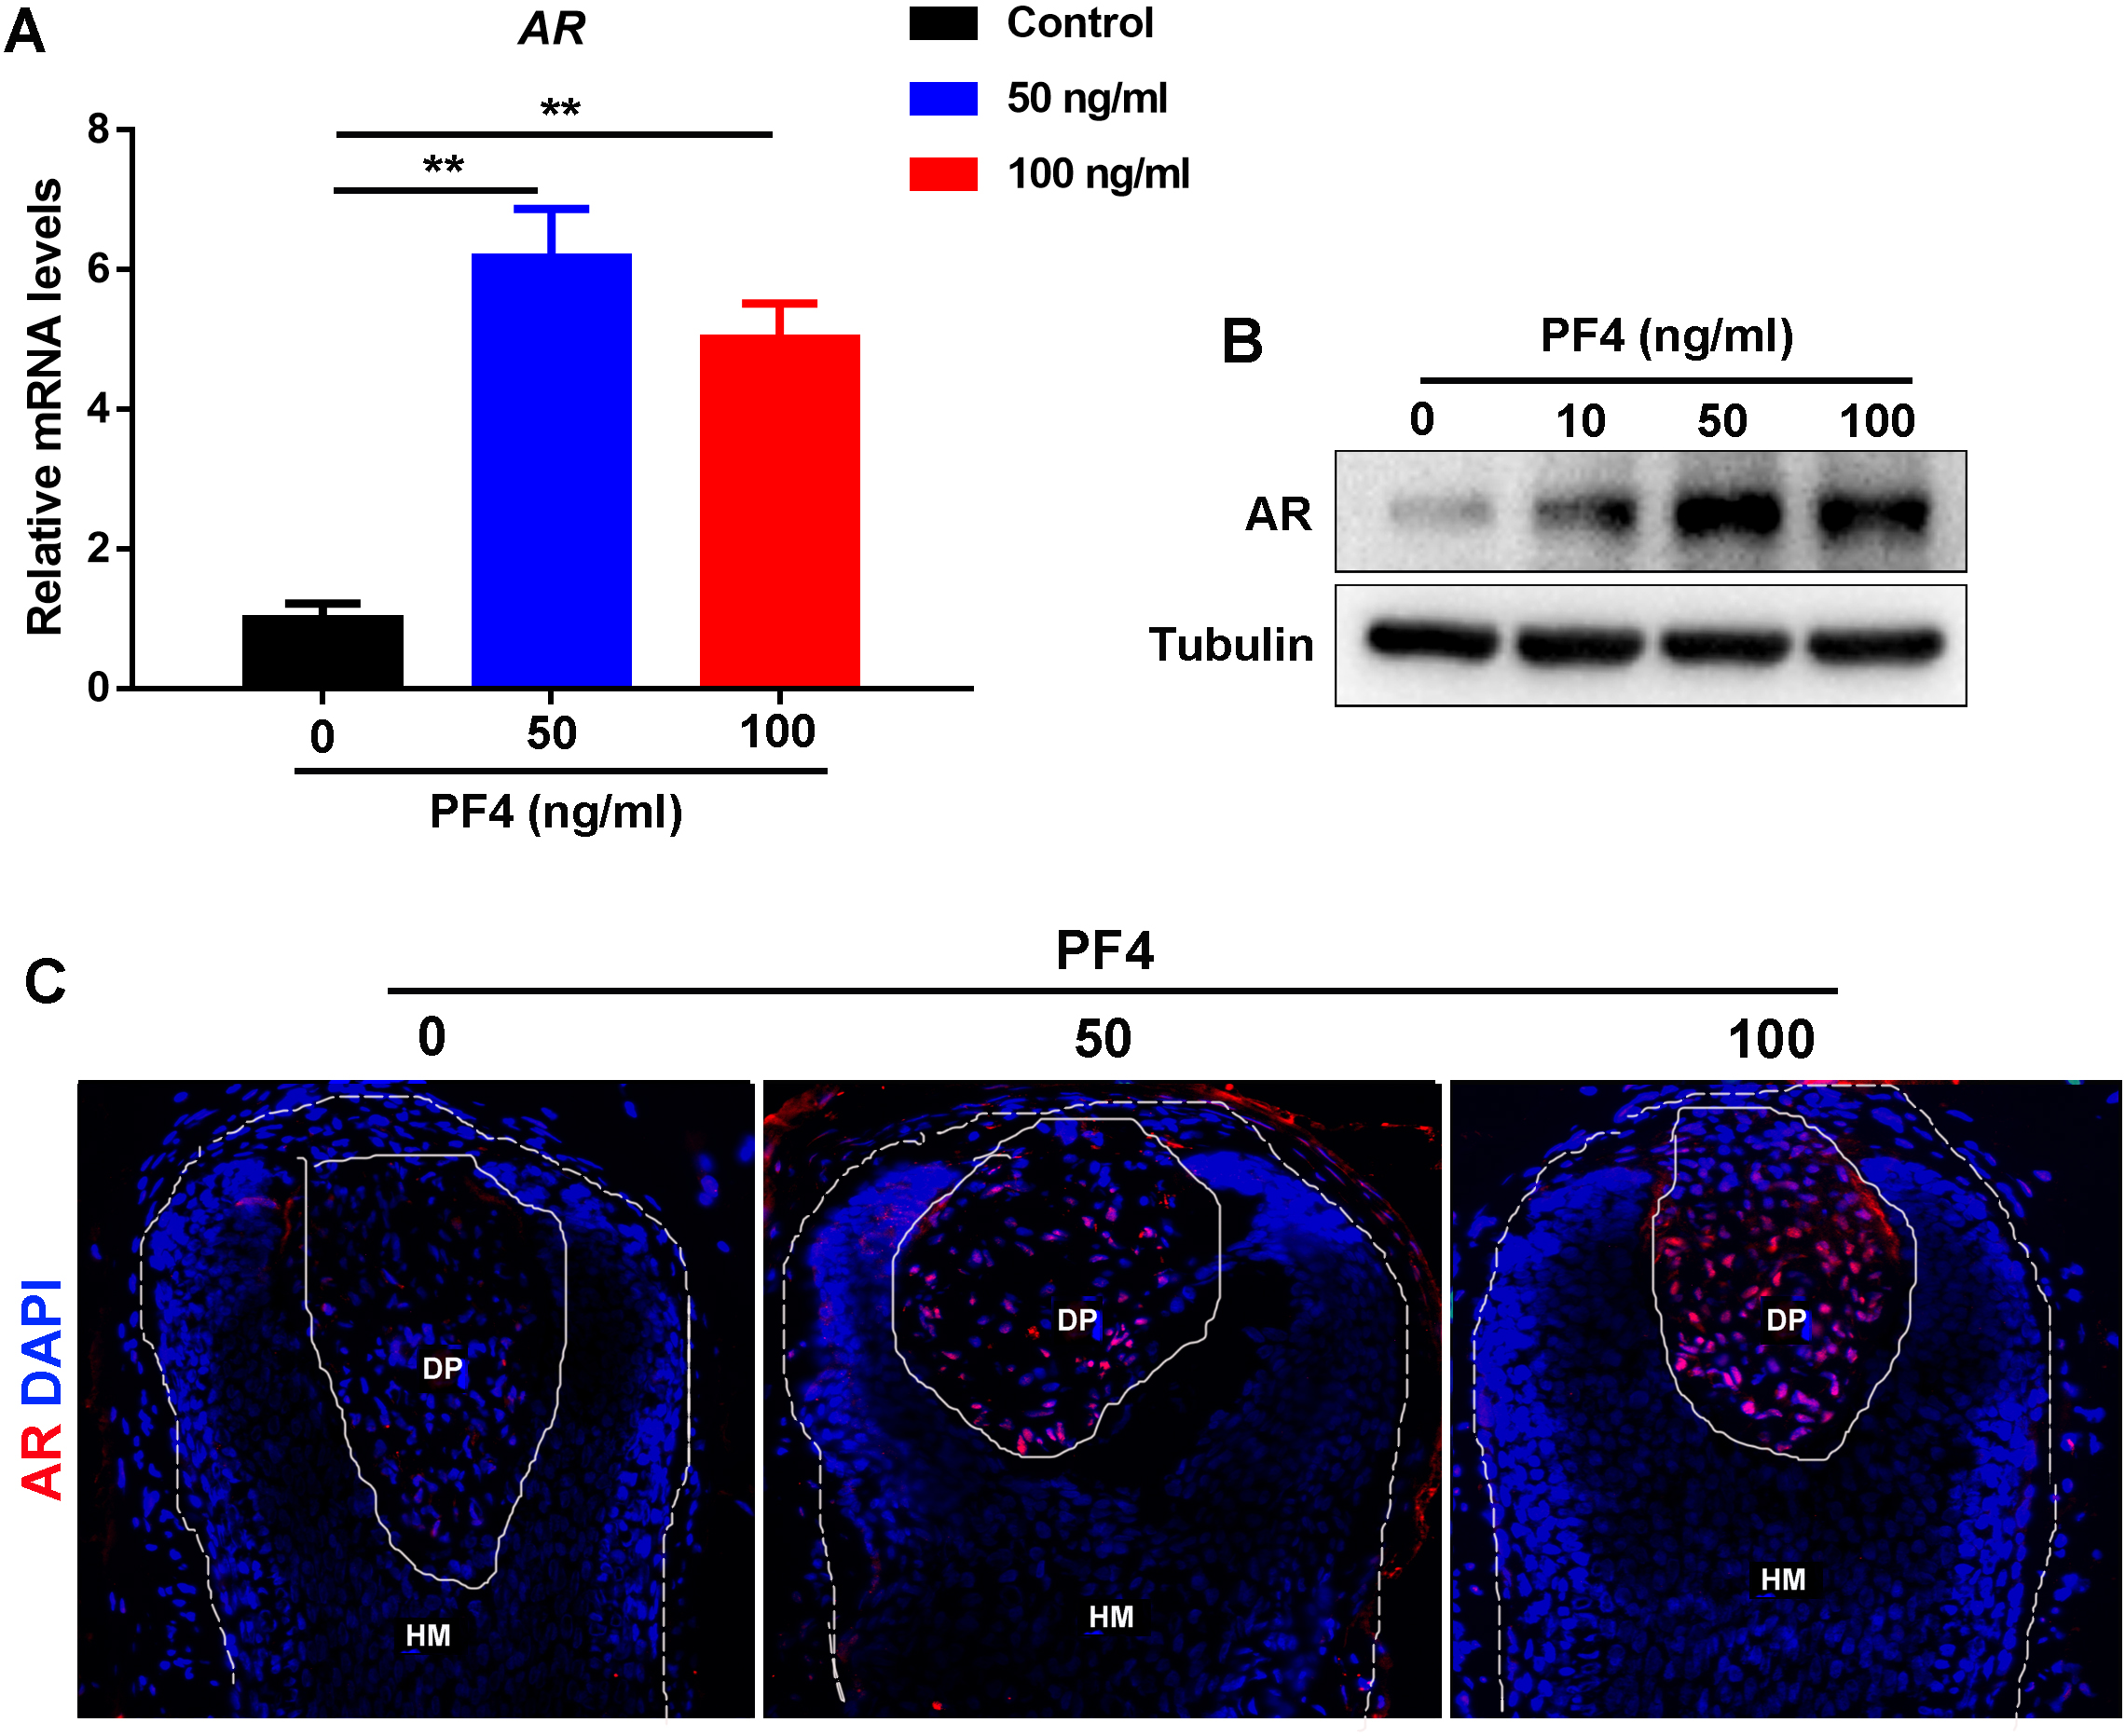 Platelet factor 4 inhibits human hair follicle growth and promotes androgen  receptor expression in human dermal papilla cells [PeerJ]